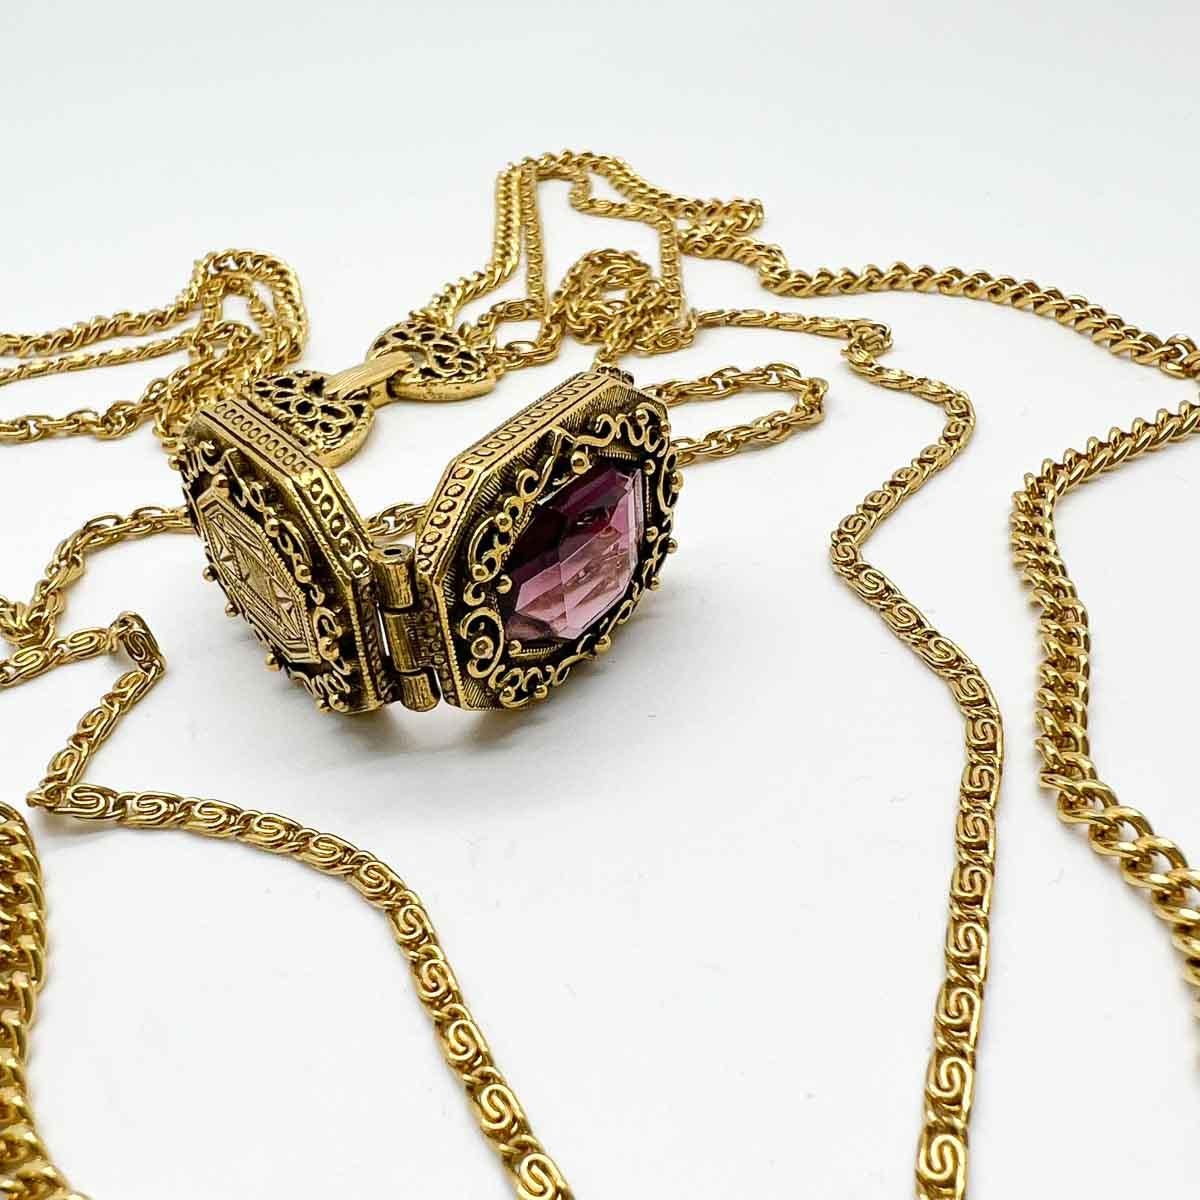 An ultra cool Vintage Goldette Amethyst Locket Chain Necklace. Long triple chains adorned with a fancy opening locket set with an amethyst crystal, inspired by Victorian jewels, makes for a wonderfully cool and chic layering piece.
Goldette started